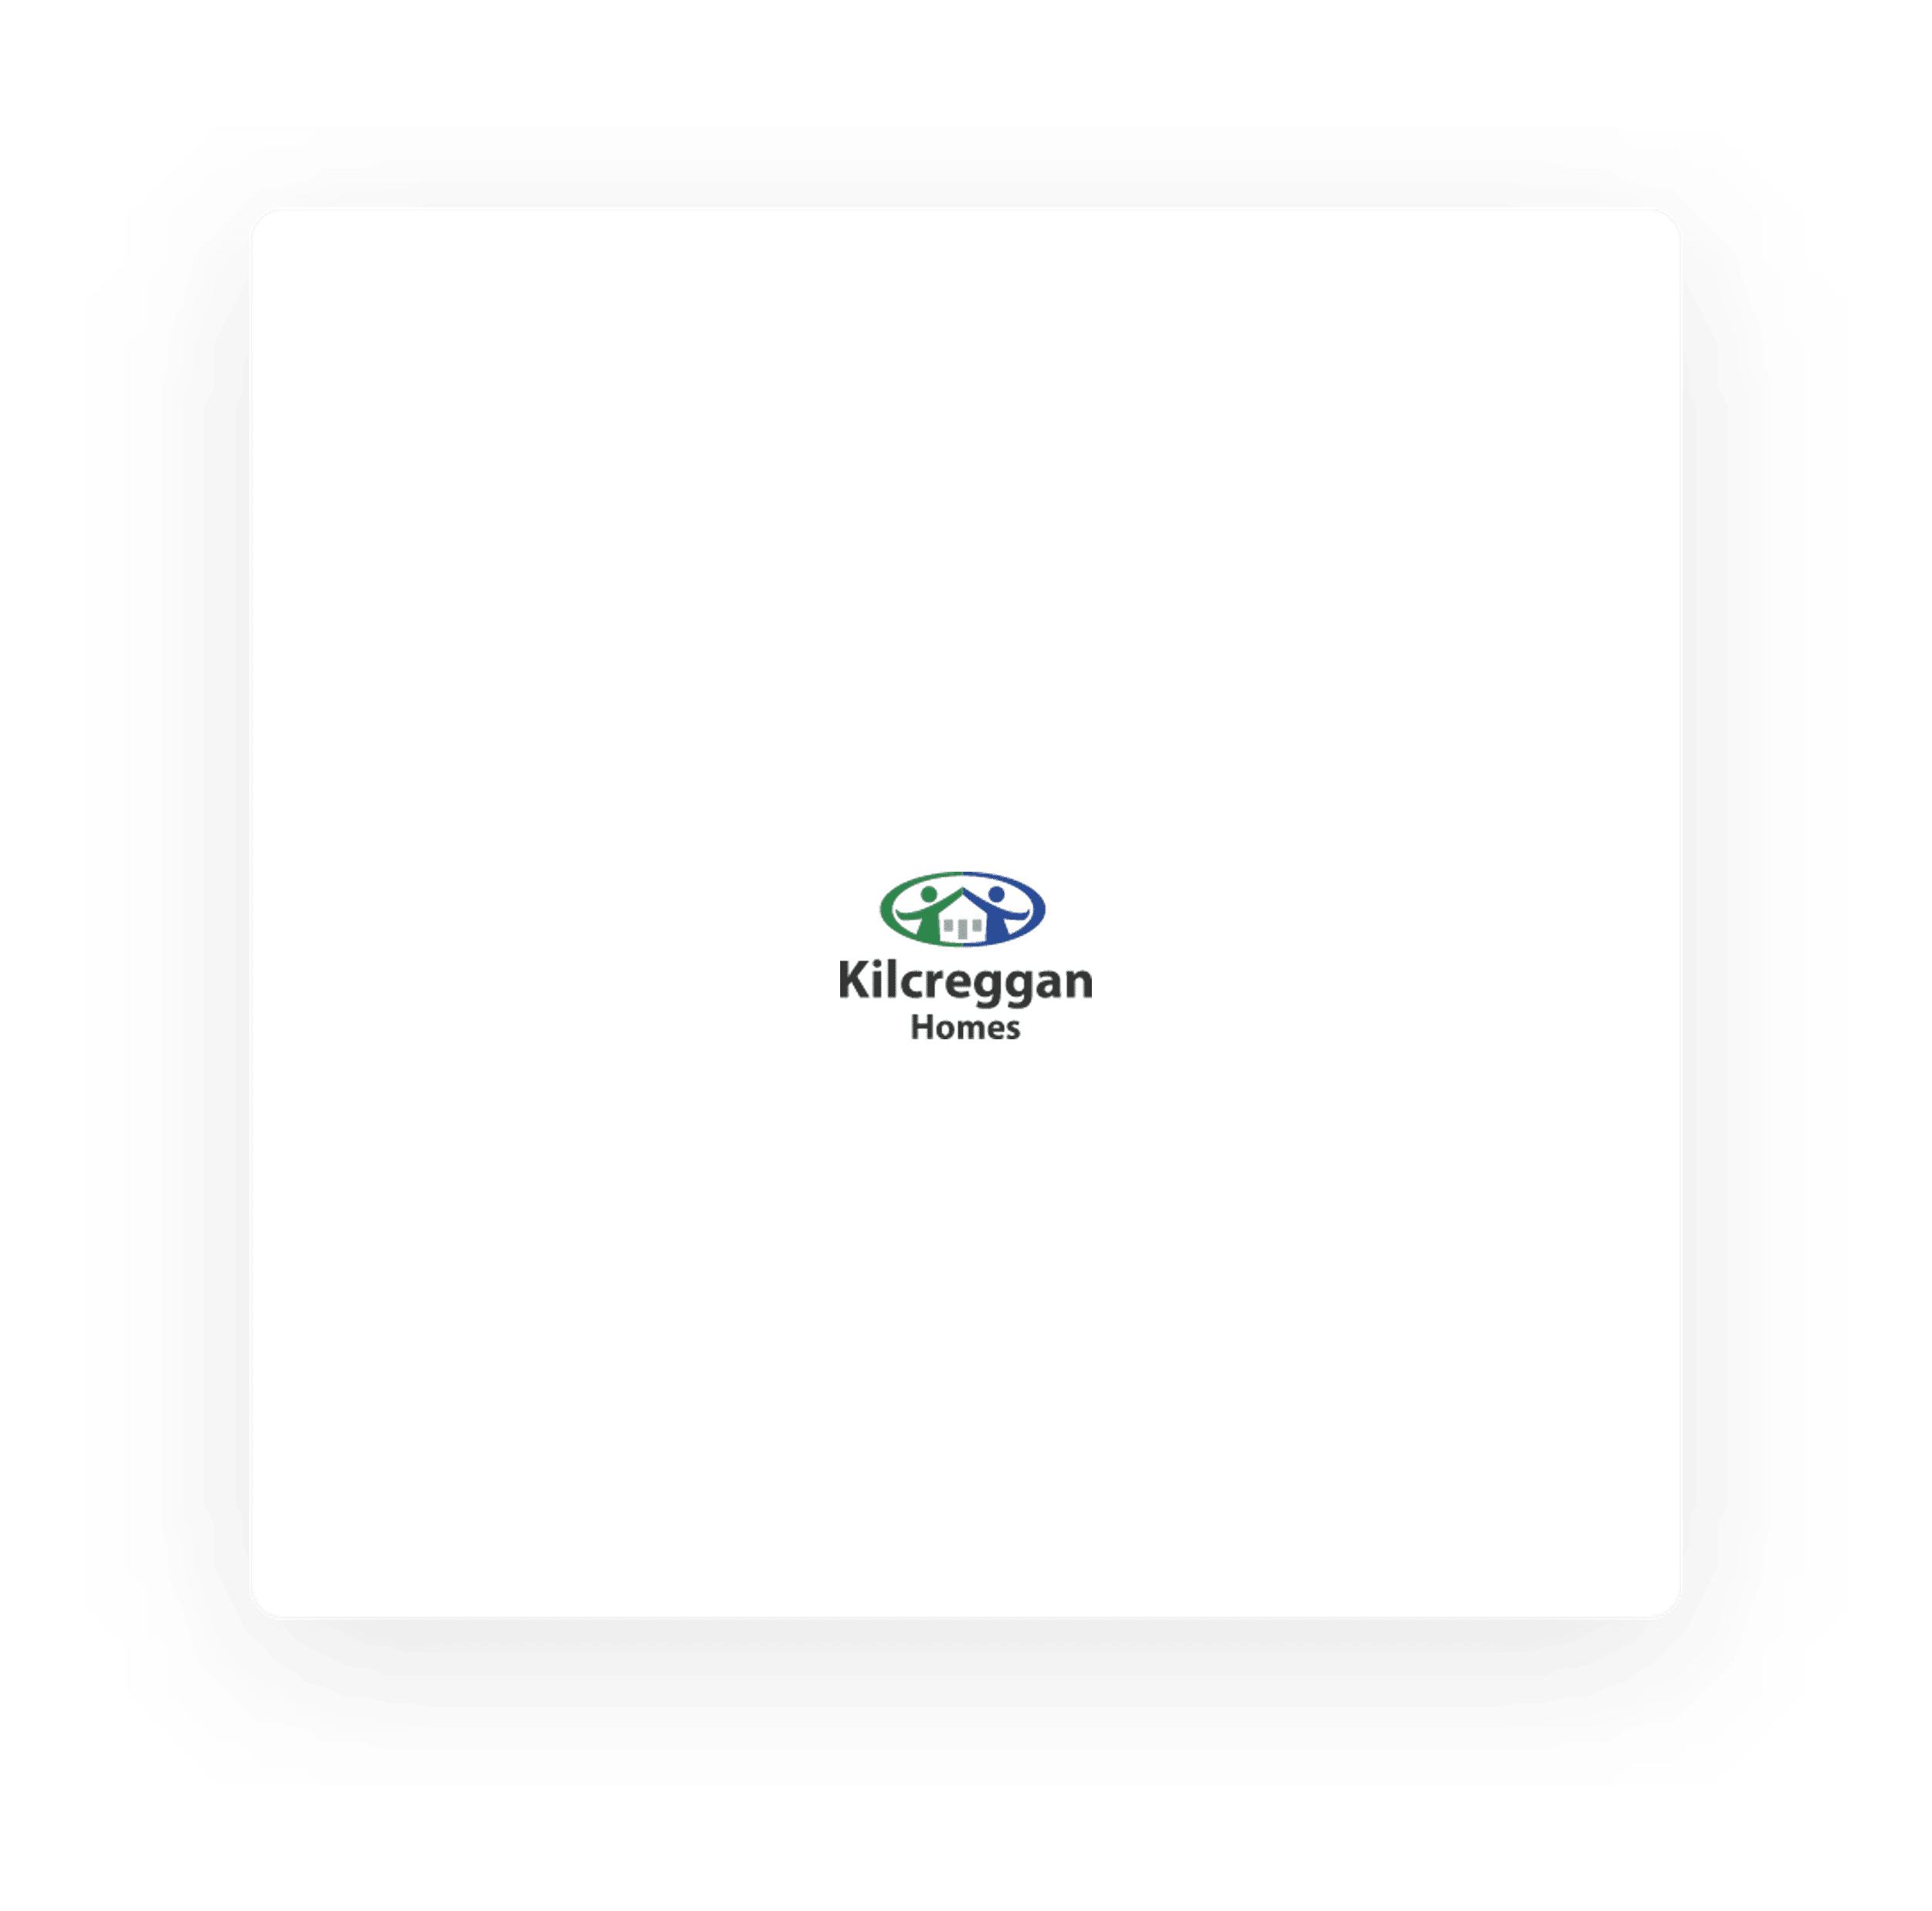 A blank page with the kilcreggan homes logo centered at the top.